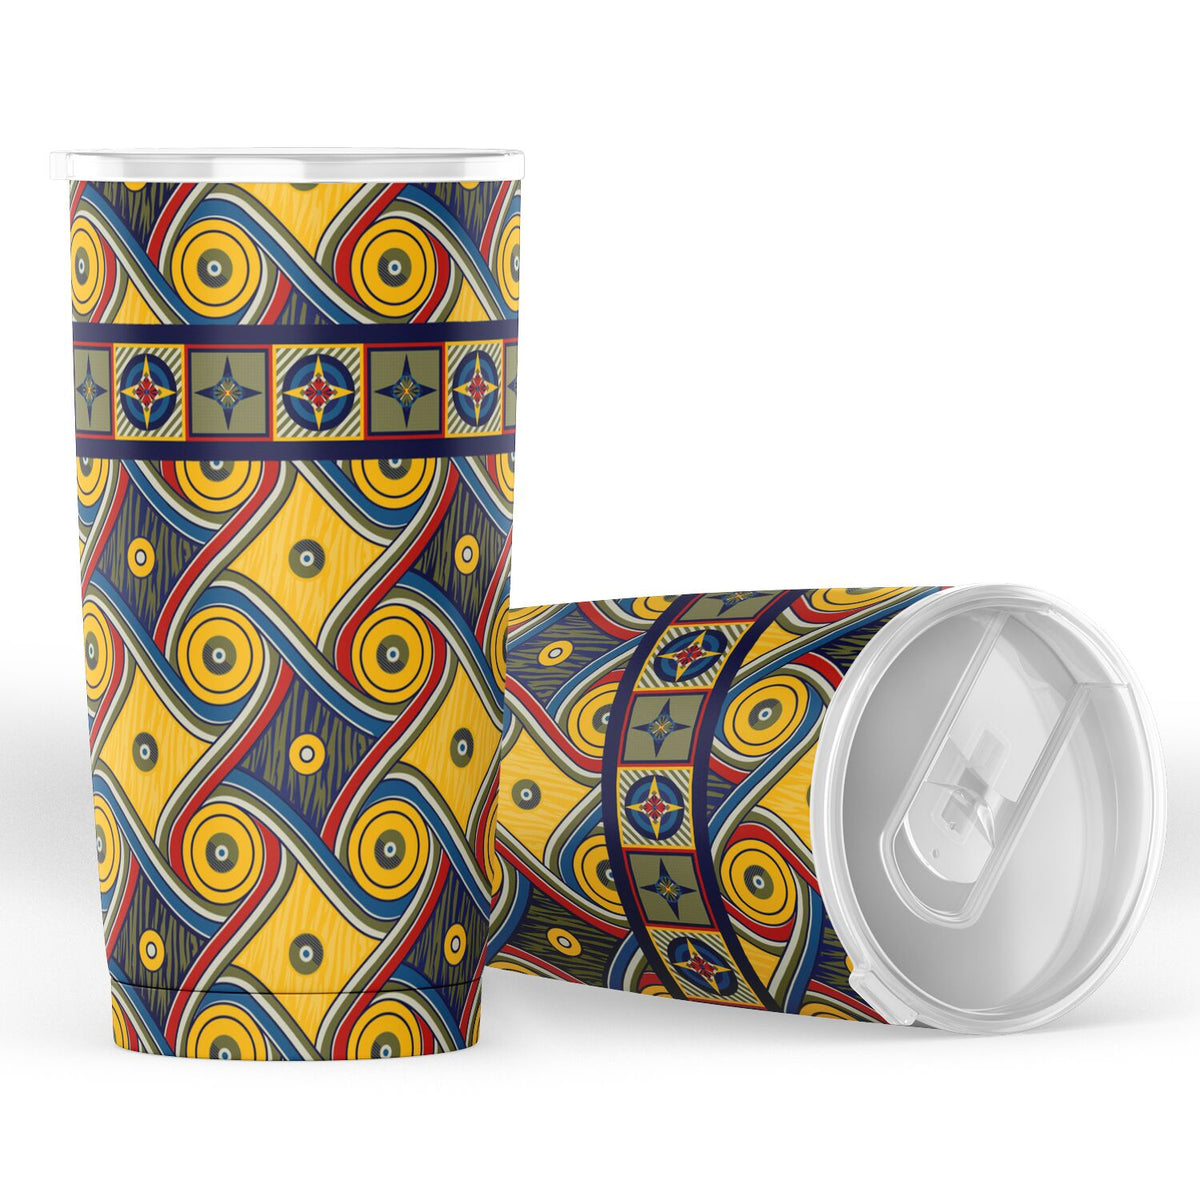 My Happy Place Galifrey One Carpet 20oz Stainless Steel Travel Tumbler